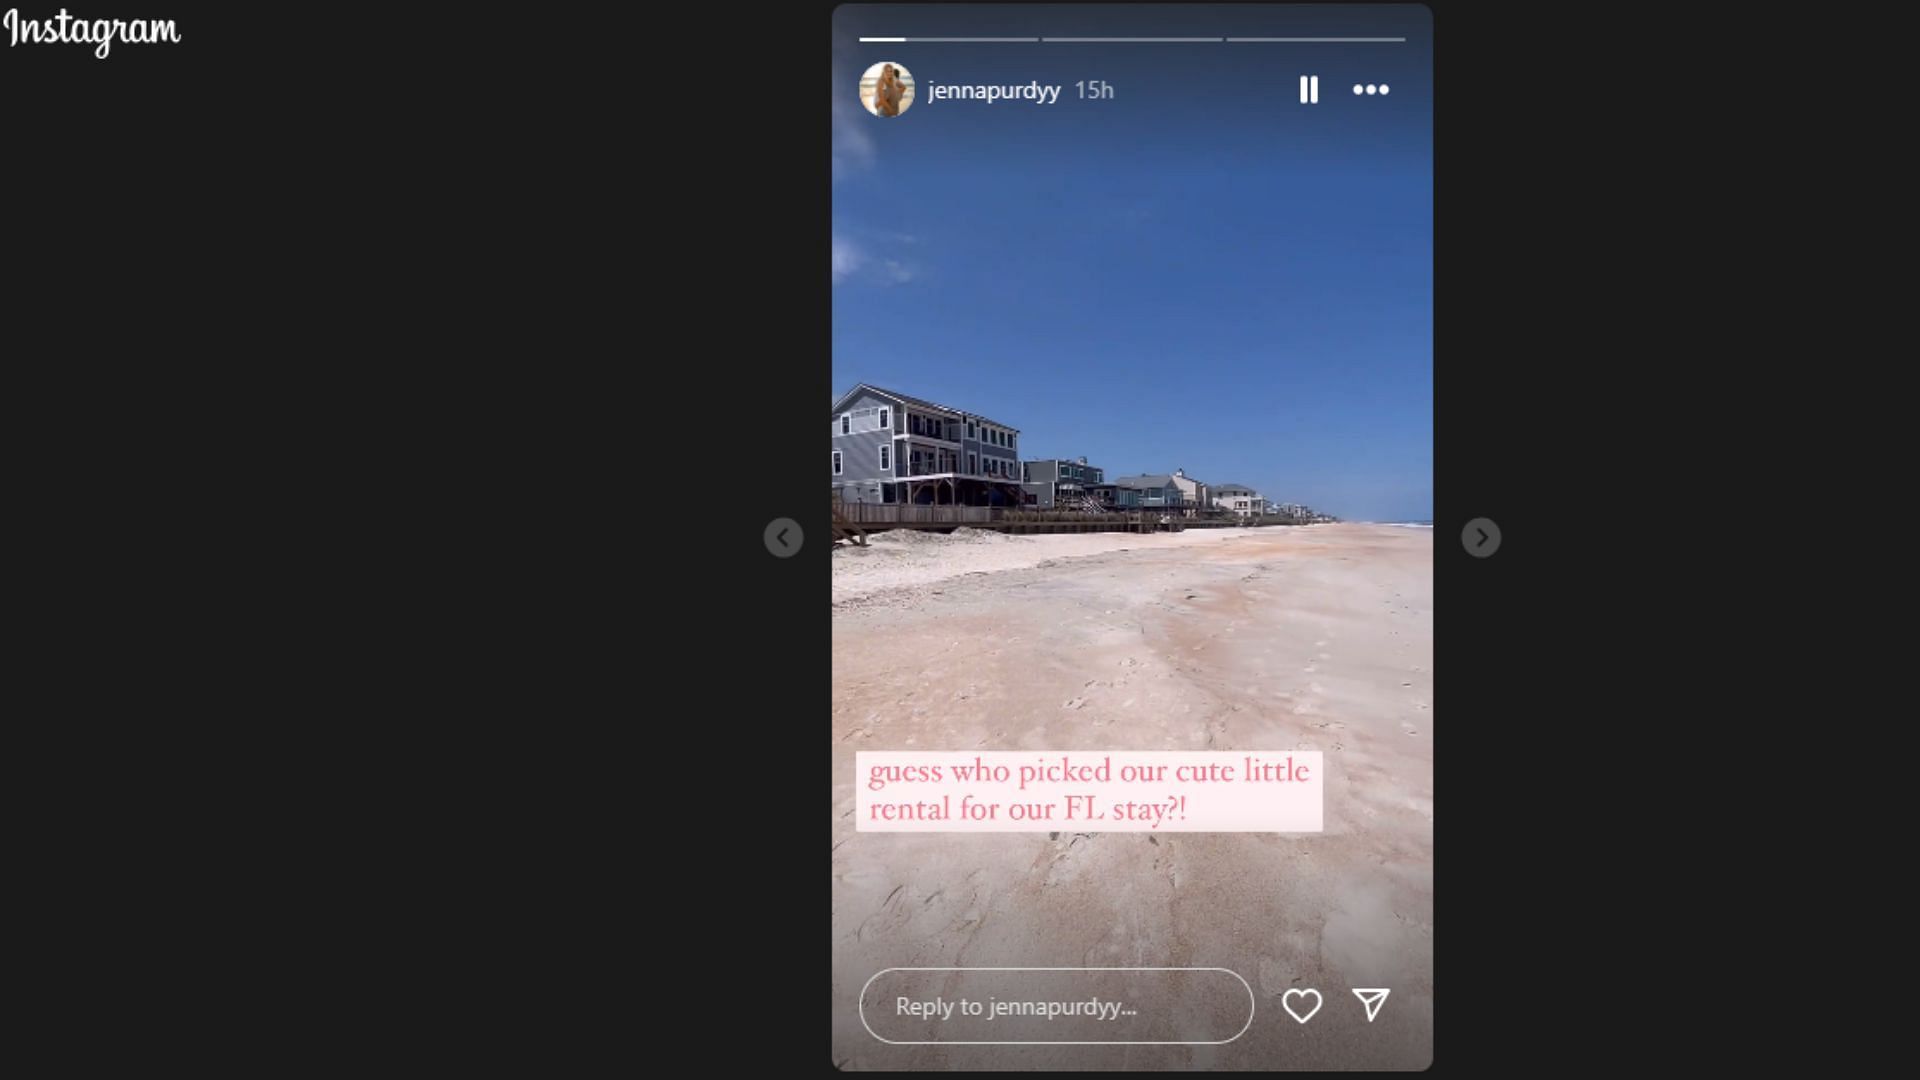 Jenna Purdy gave a glimpse at their recent vacation in Florida.